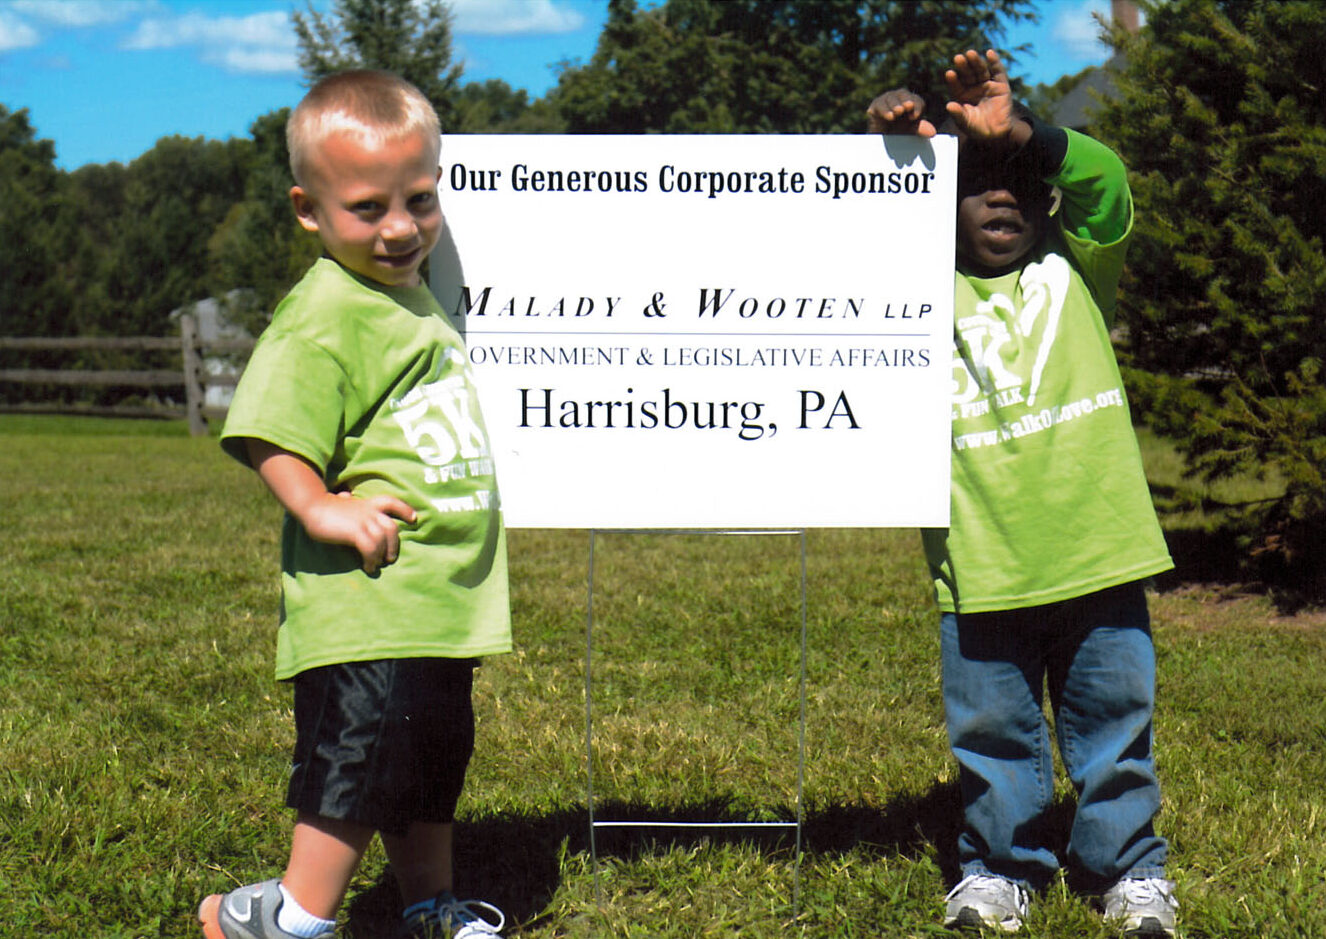 two young boys standing next to a sign that thanks Malady & Wooten government & legislative affairs for their corporate sponsorship